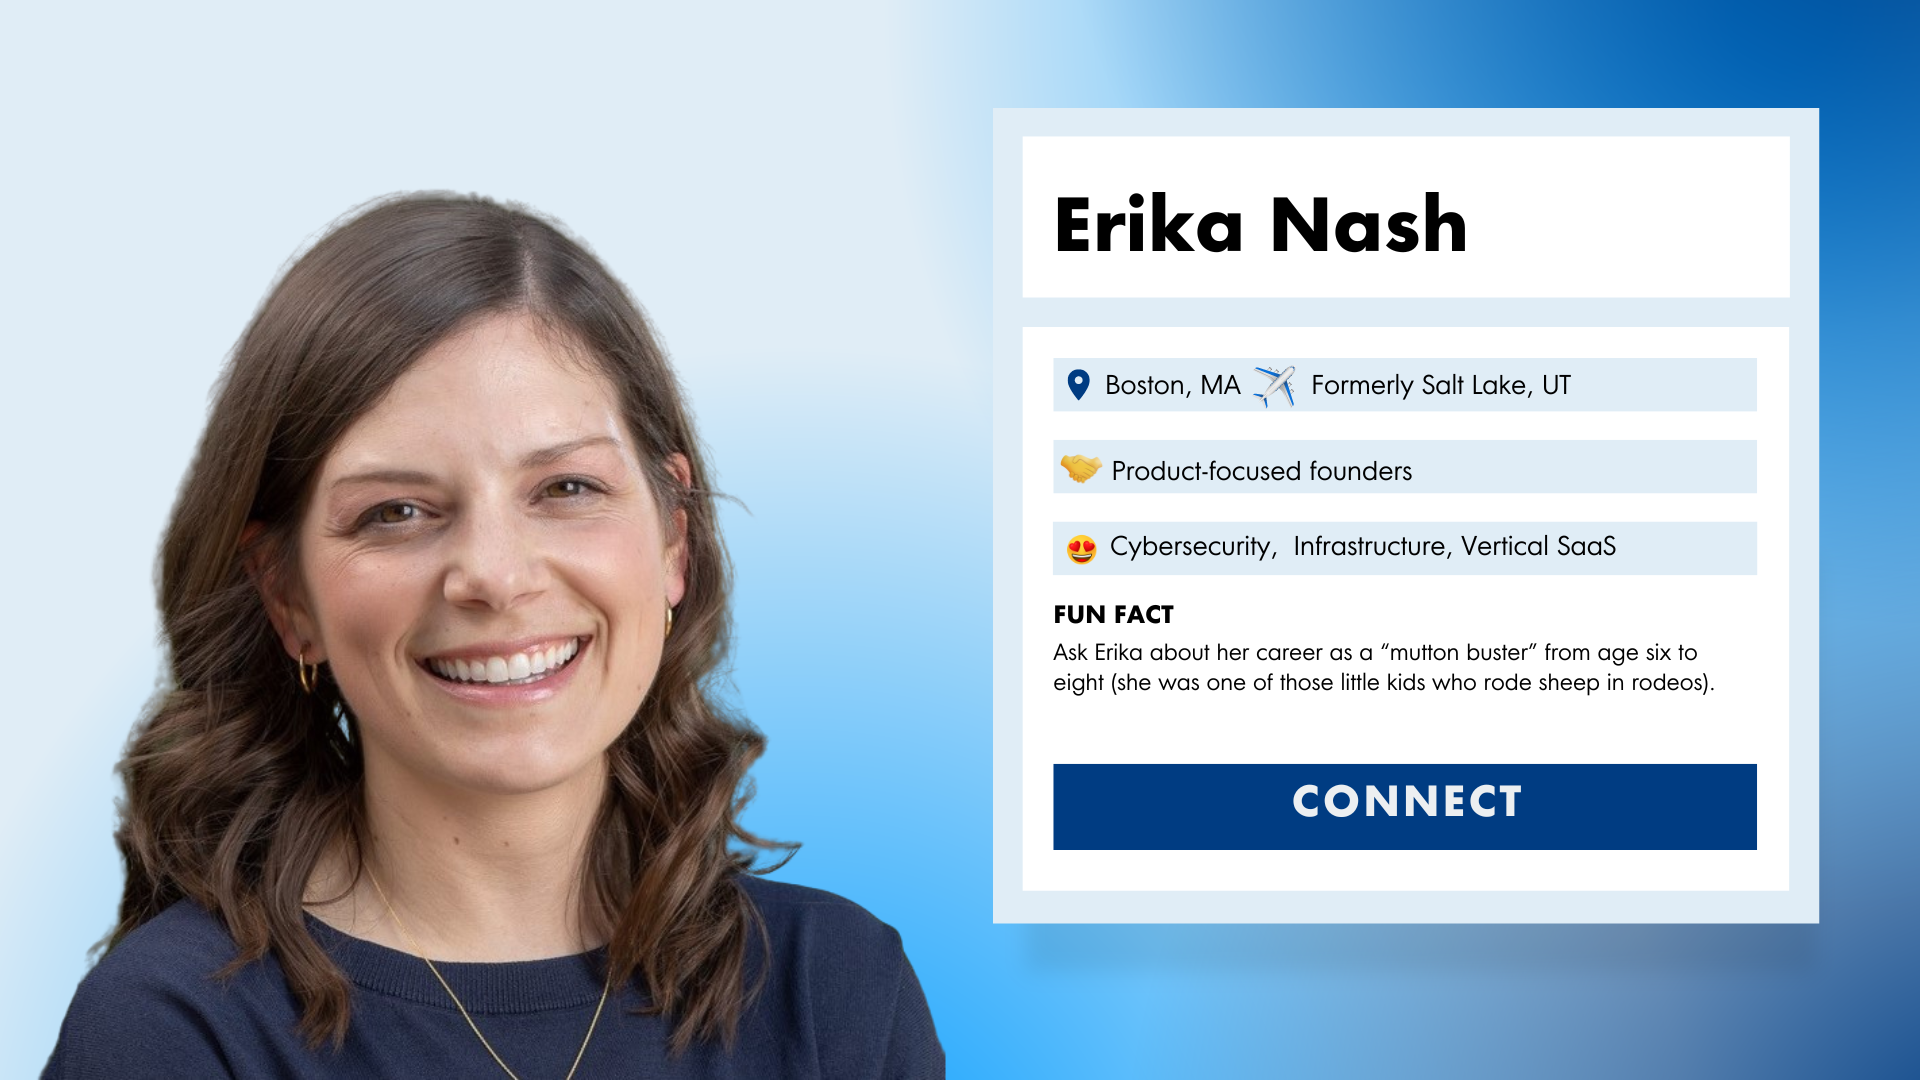 Infographic and image of Erika Nash, a vice president on the investment team at OpenView.